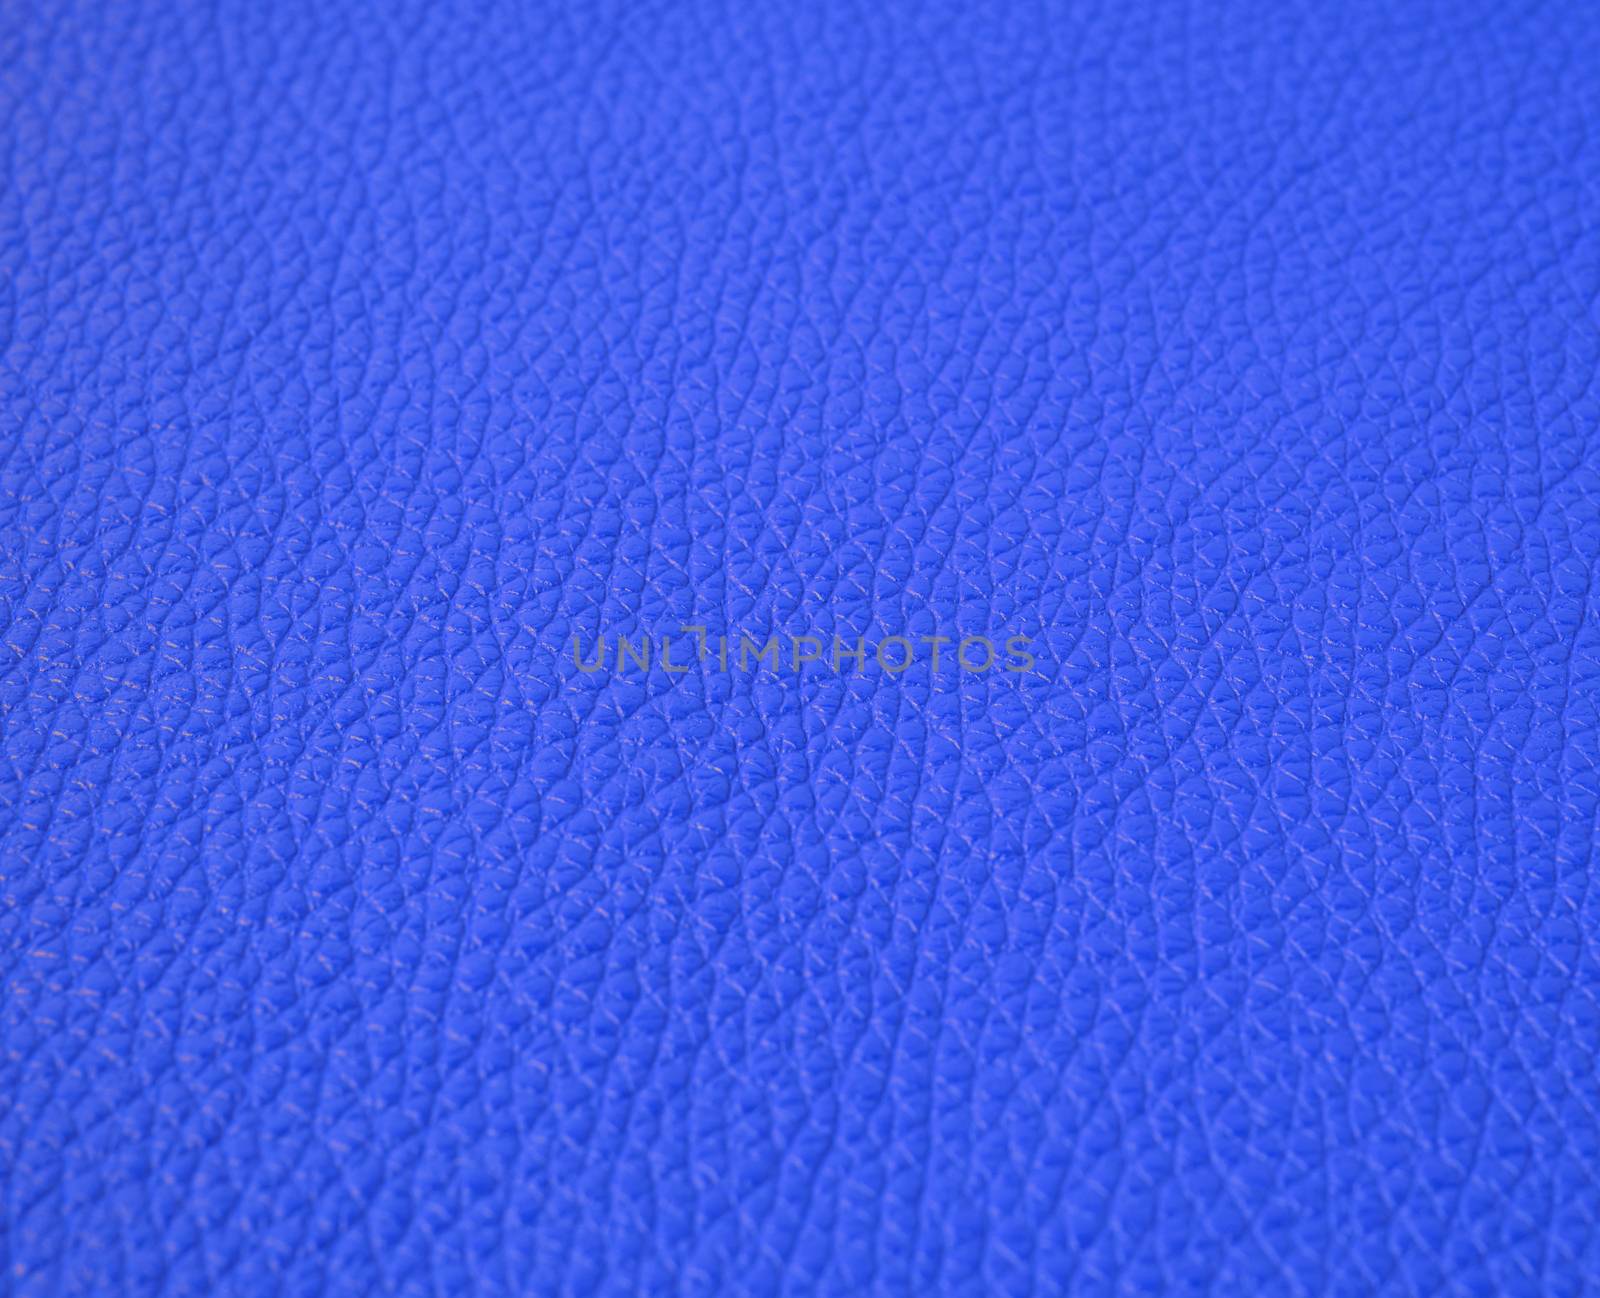 texture of dark blue cow leather, full frame, material for sewin by ndanko